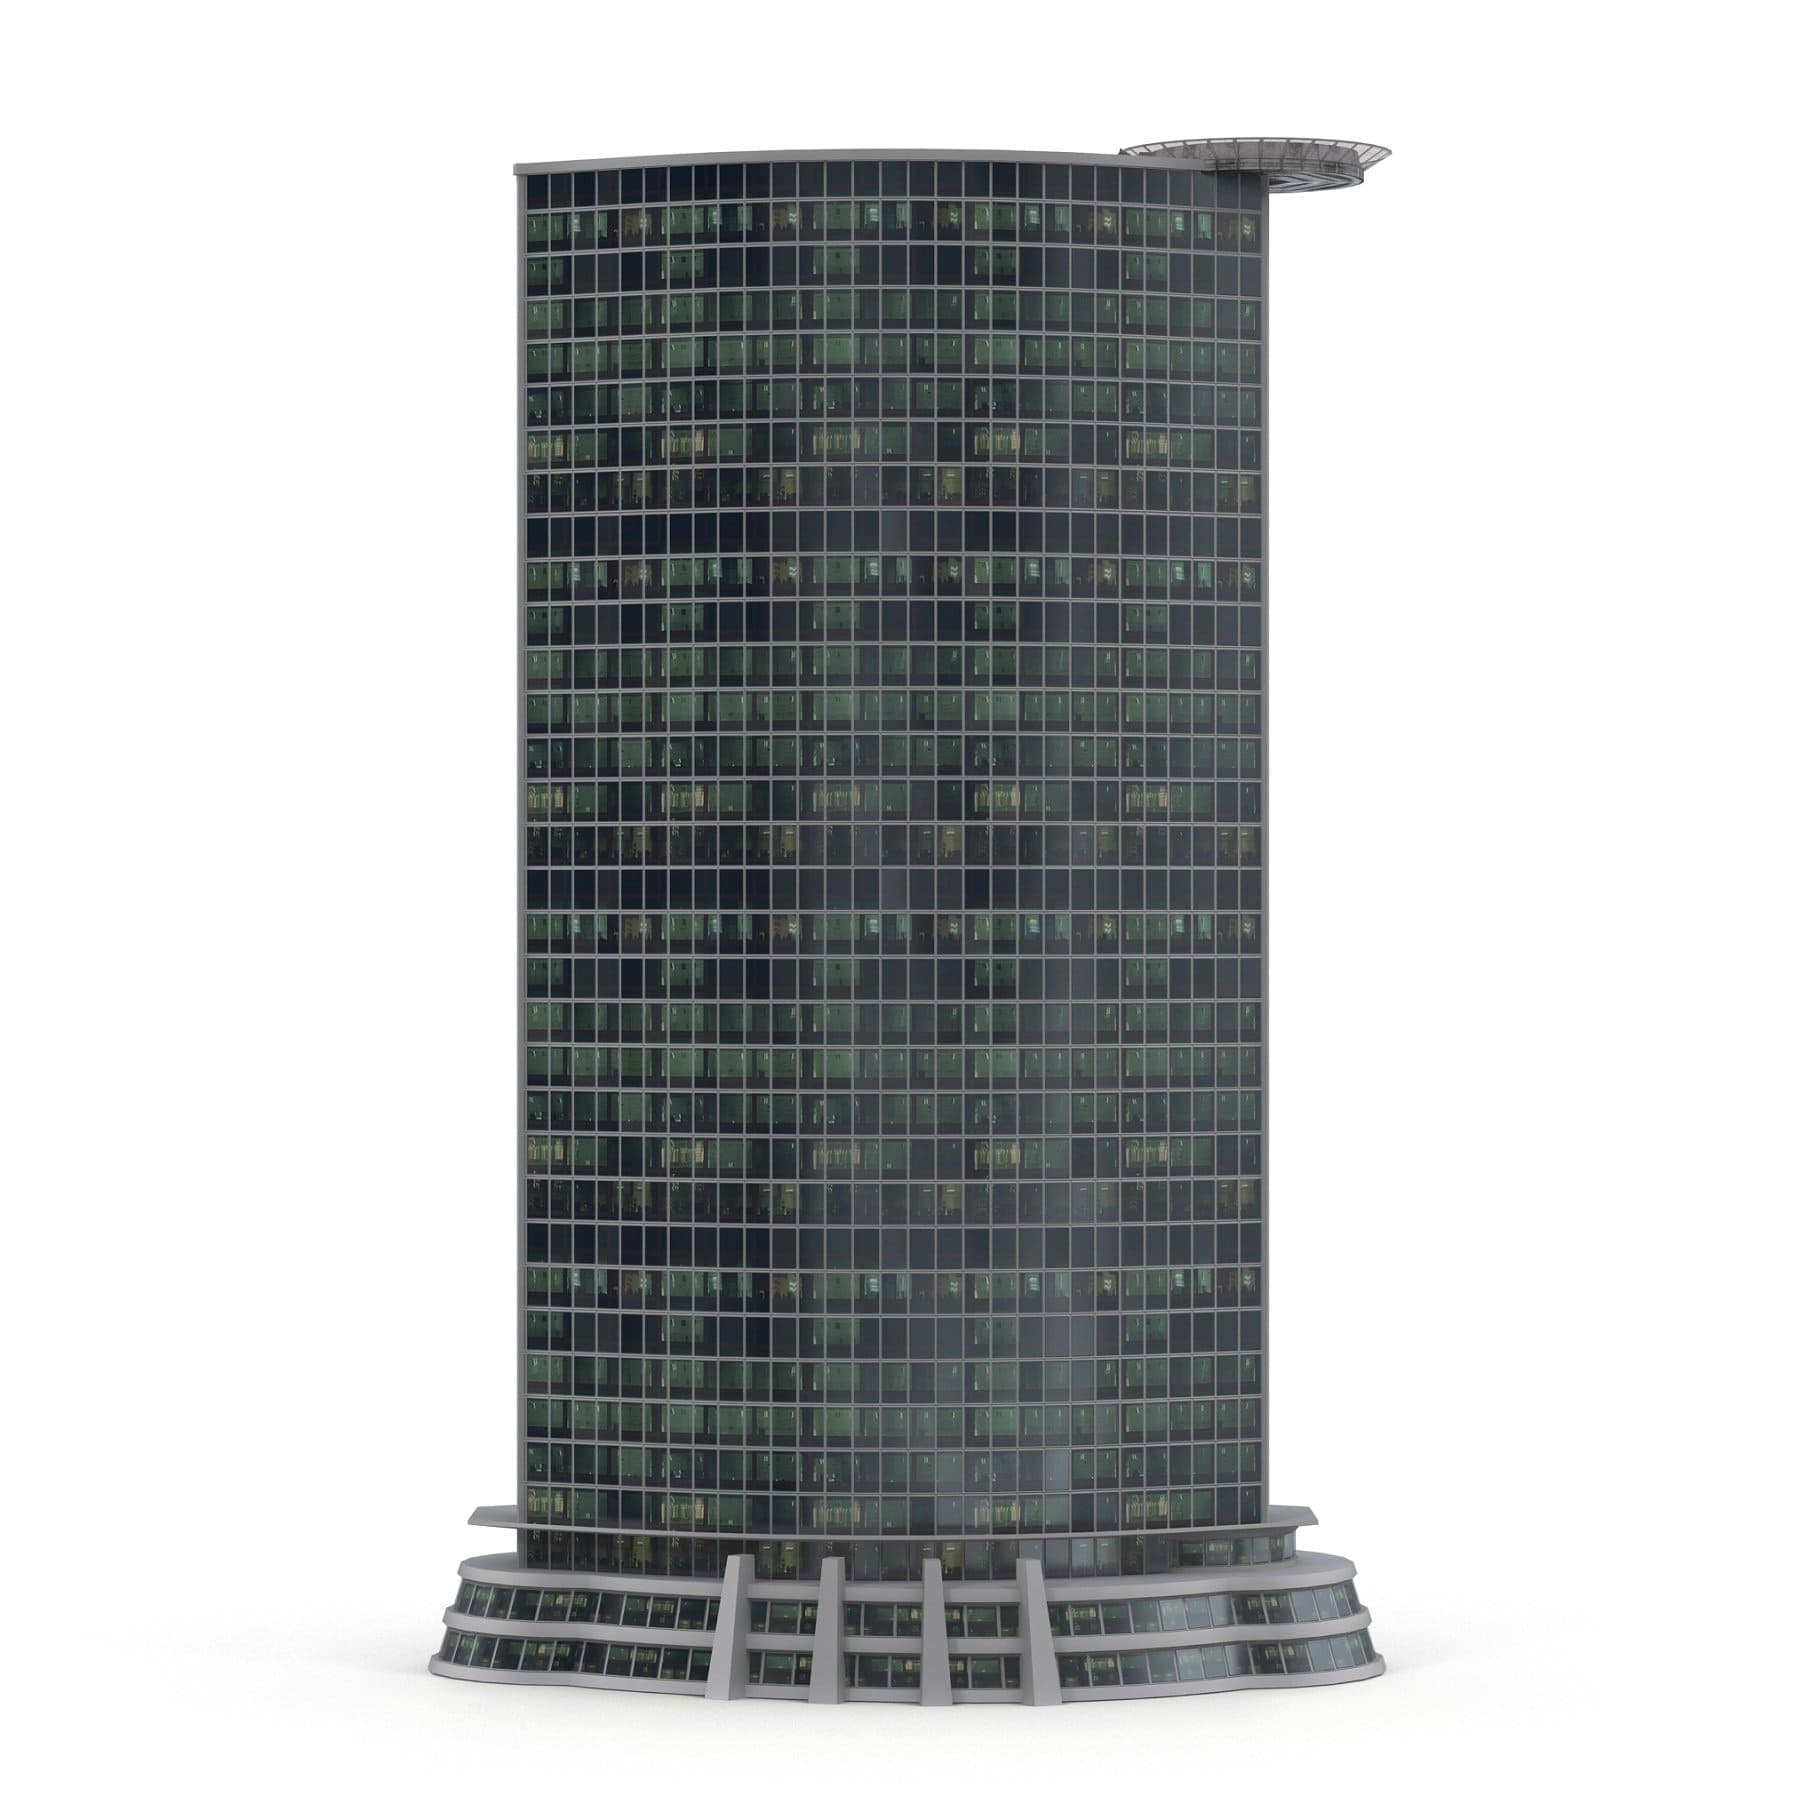 Skyscraper made of three metals: glass, concrete and metal.